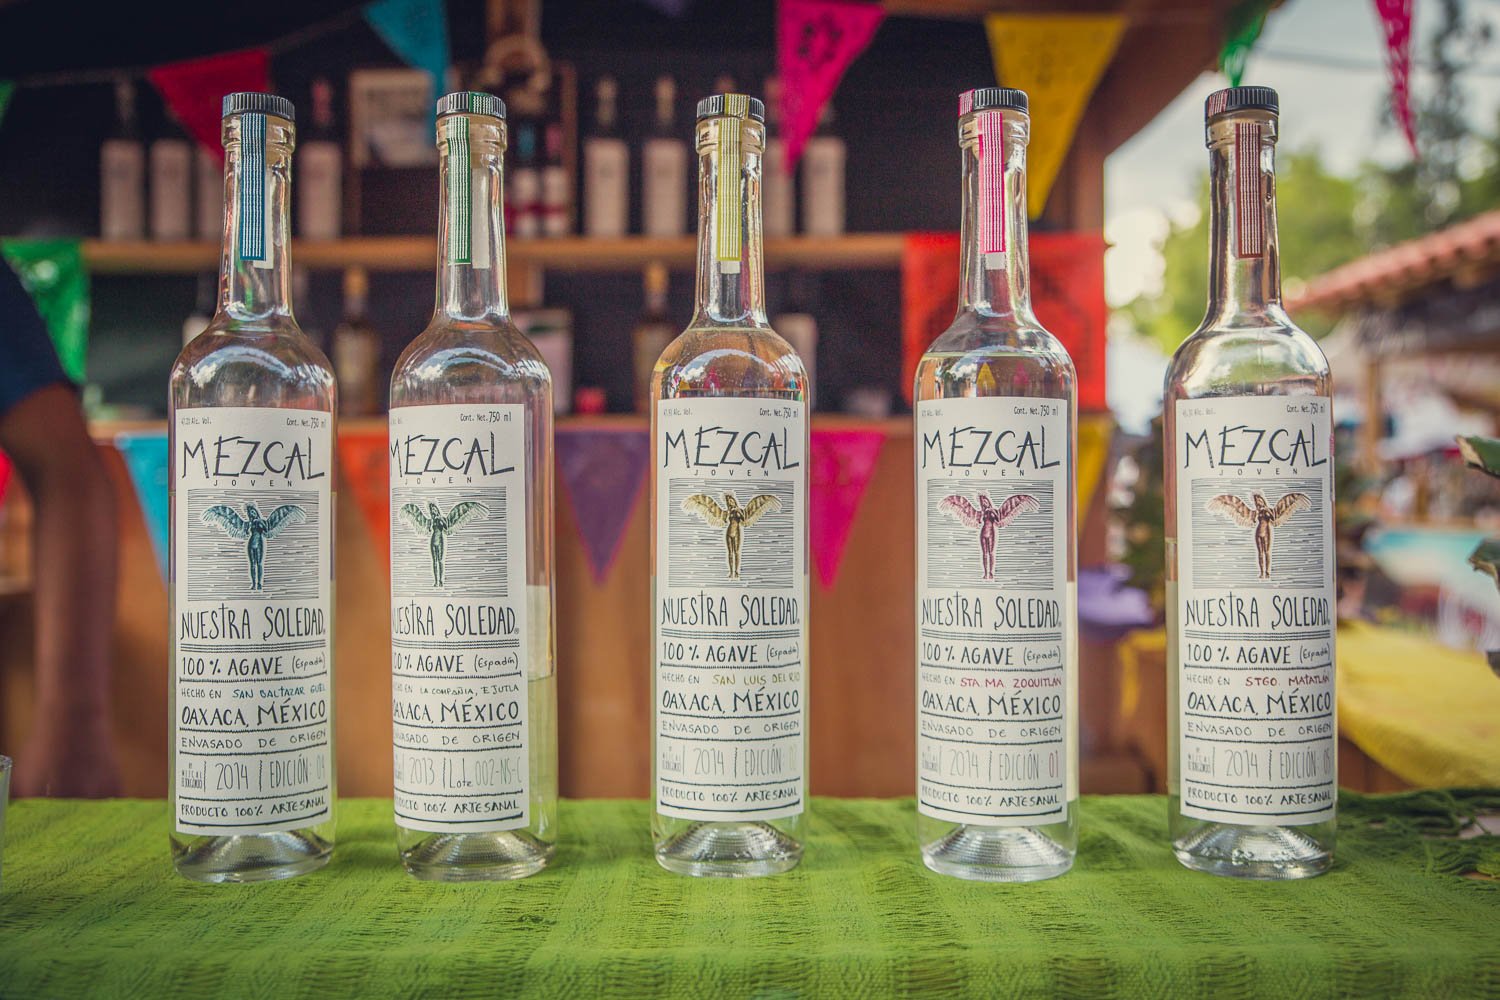 No shortage of Mezcal to sample in these parts…